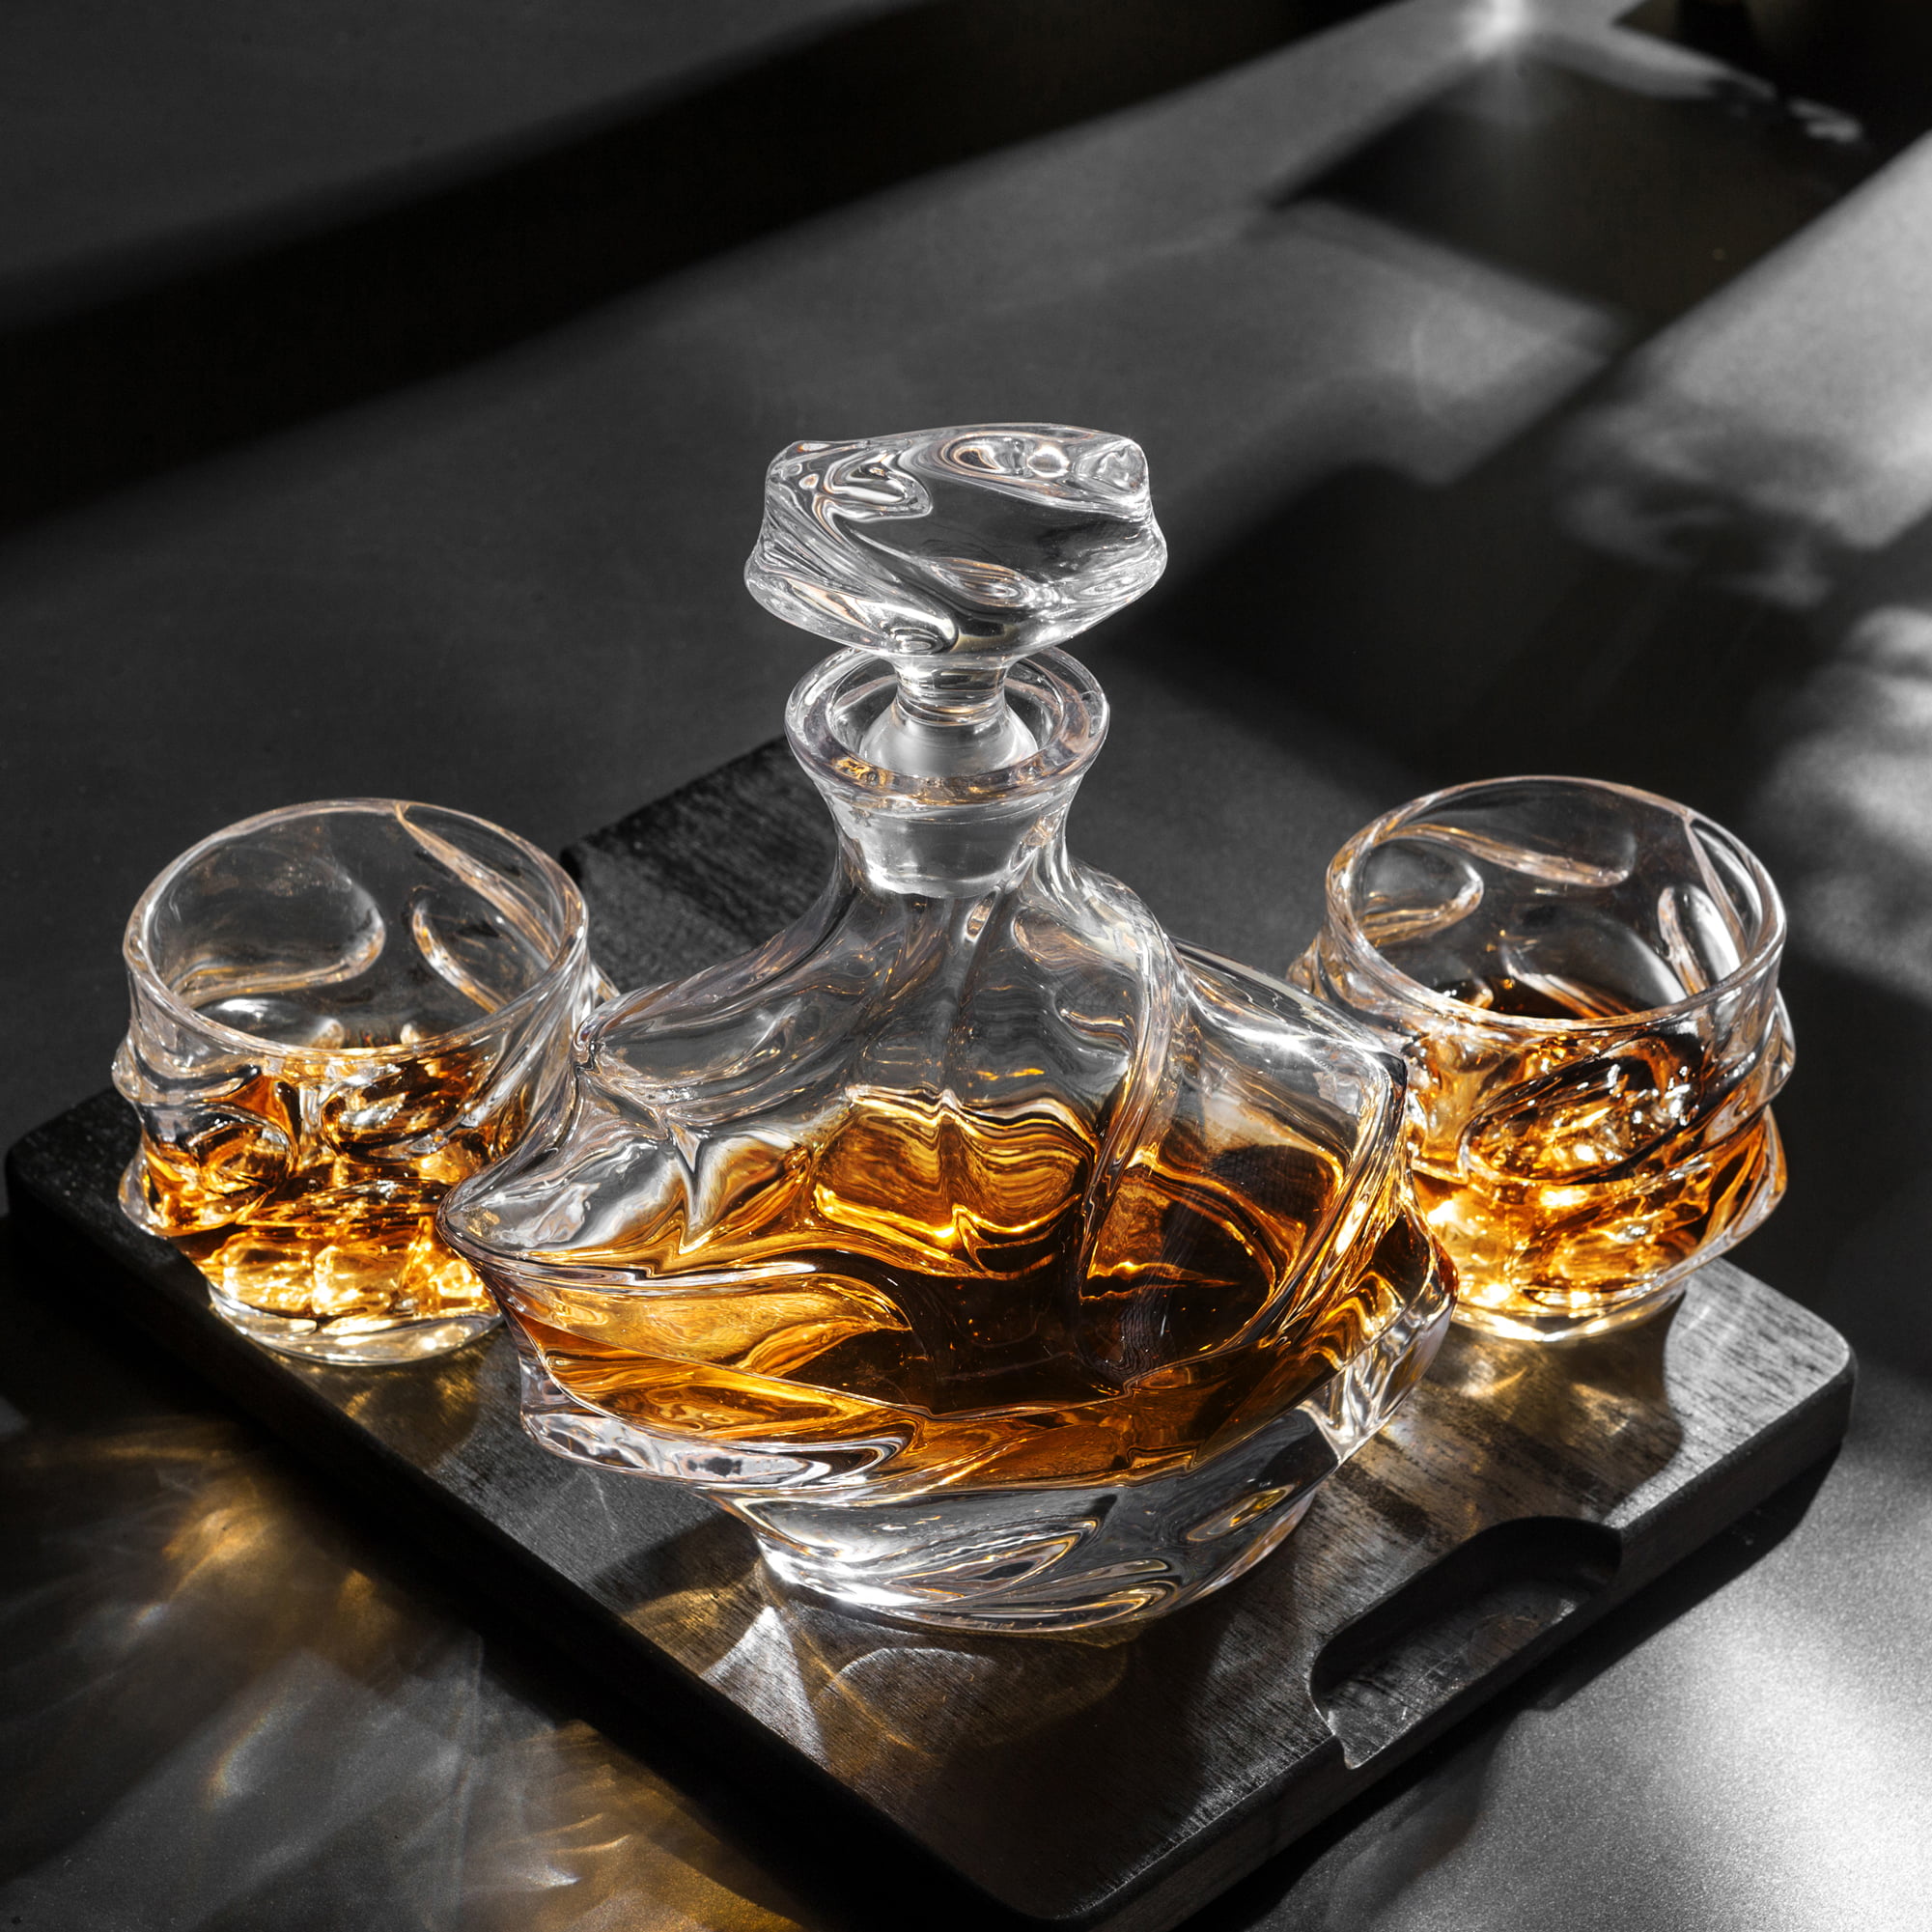 KANARS Whiskey Decanter Set, Premium Crystal Liquor Decanter with 6 Old  Fashioned Glasses for Cocktail Scotch Bourbon Irish Whisky Alcohol, Unique  Men